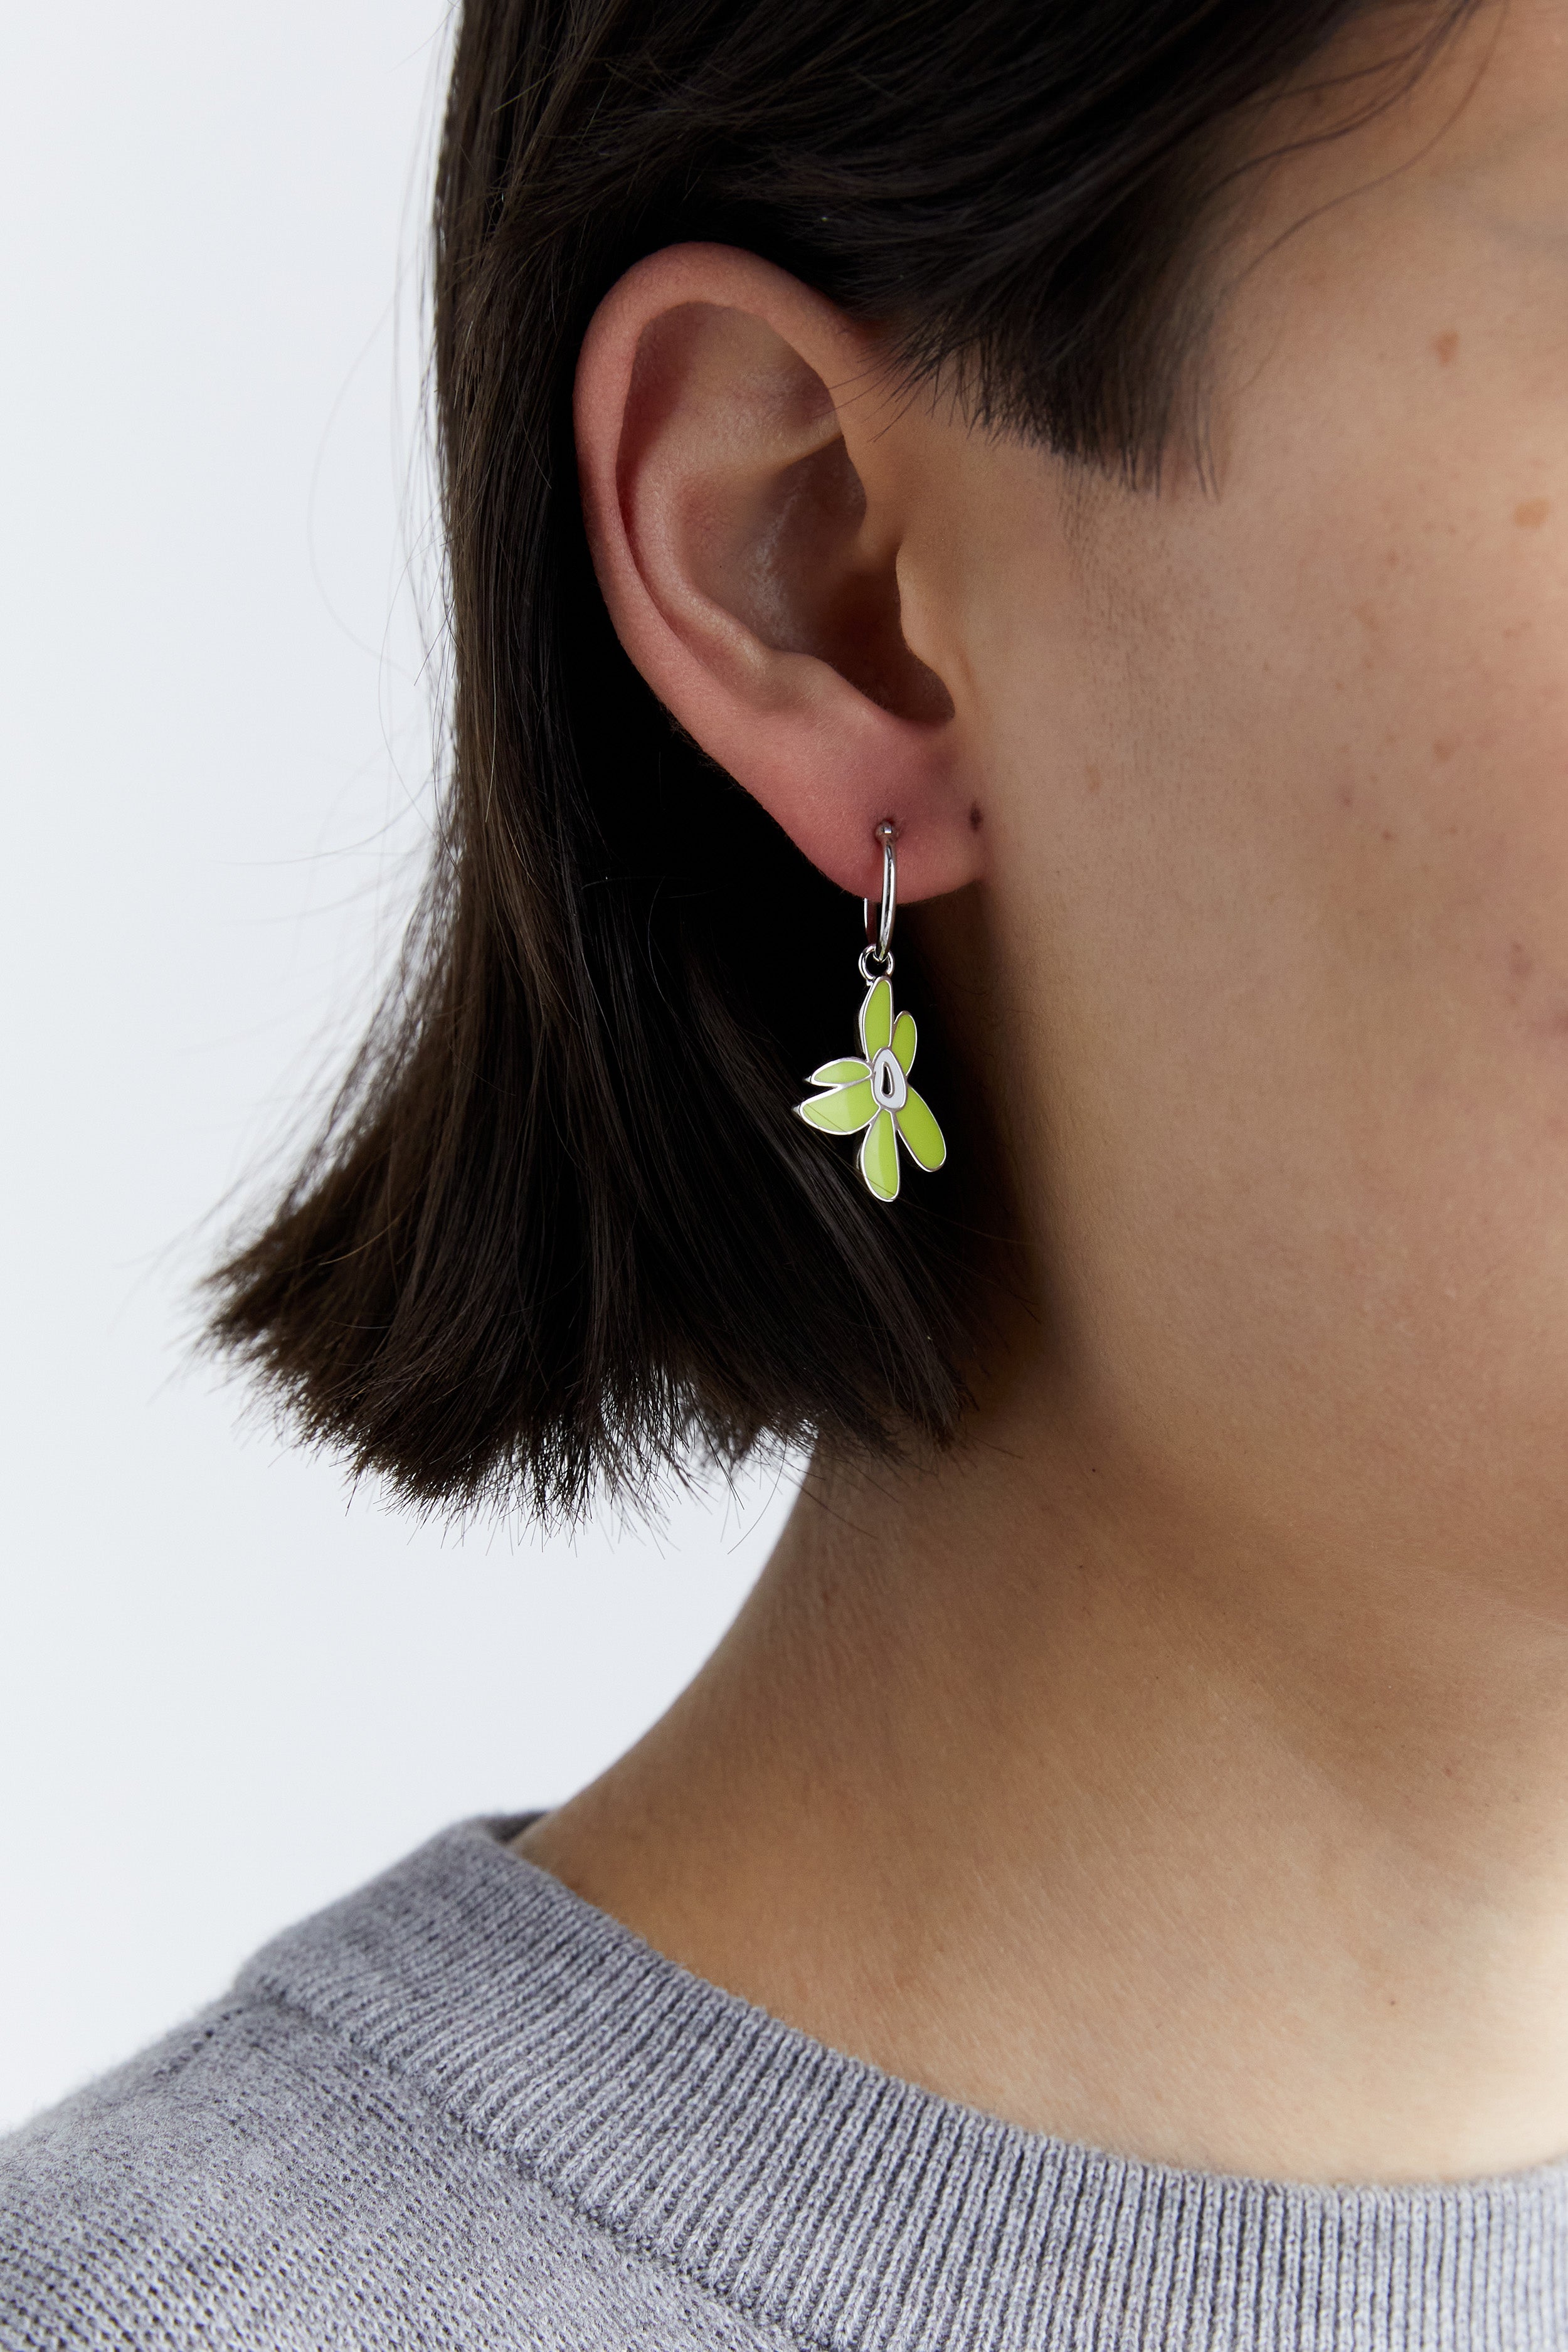 The WARPED GESTURES EARRING  available online with global shipping, and in PAM Stores Melbourne and Sydney.